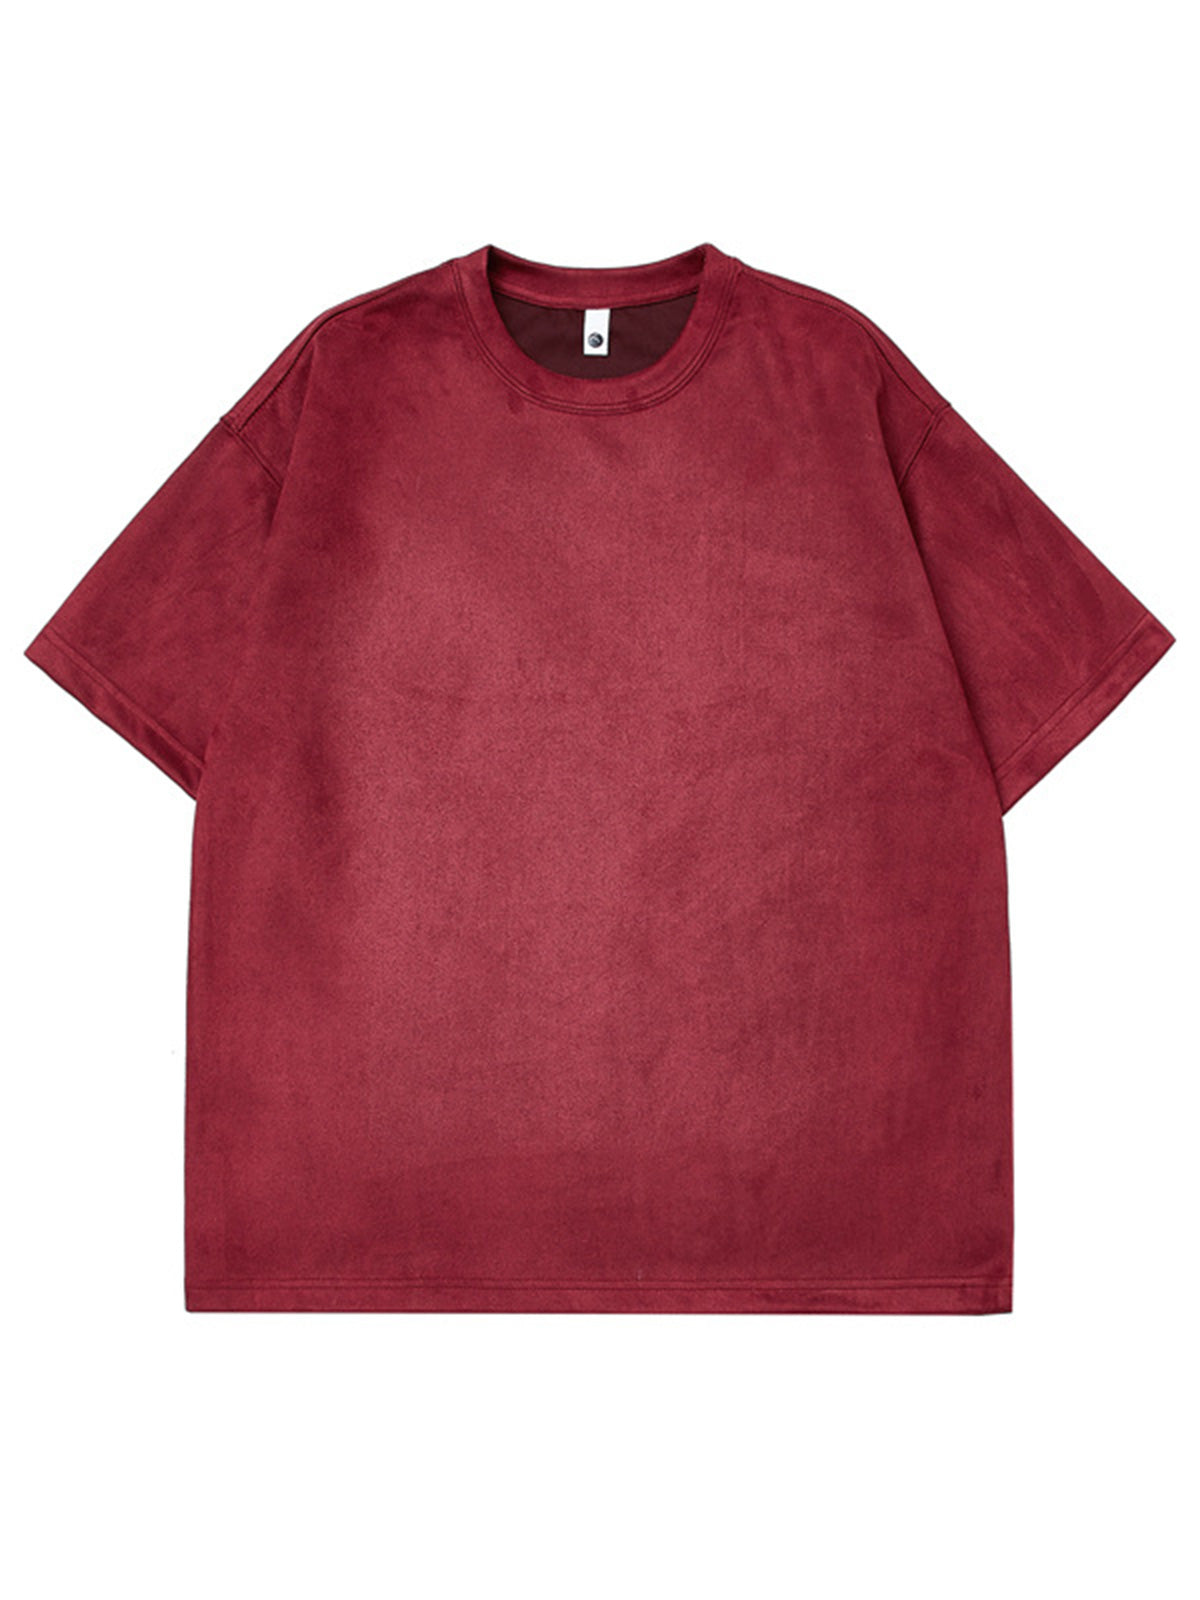 Men's Round Neck Suede Solid Color Short Sleeve T-Shirt